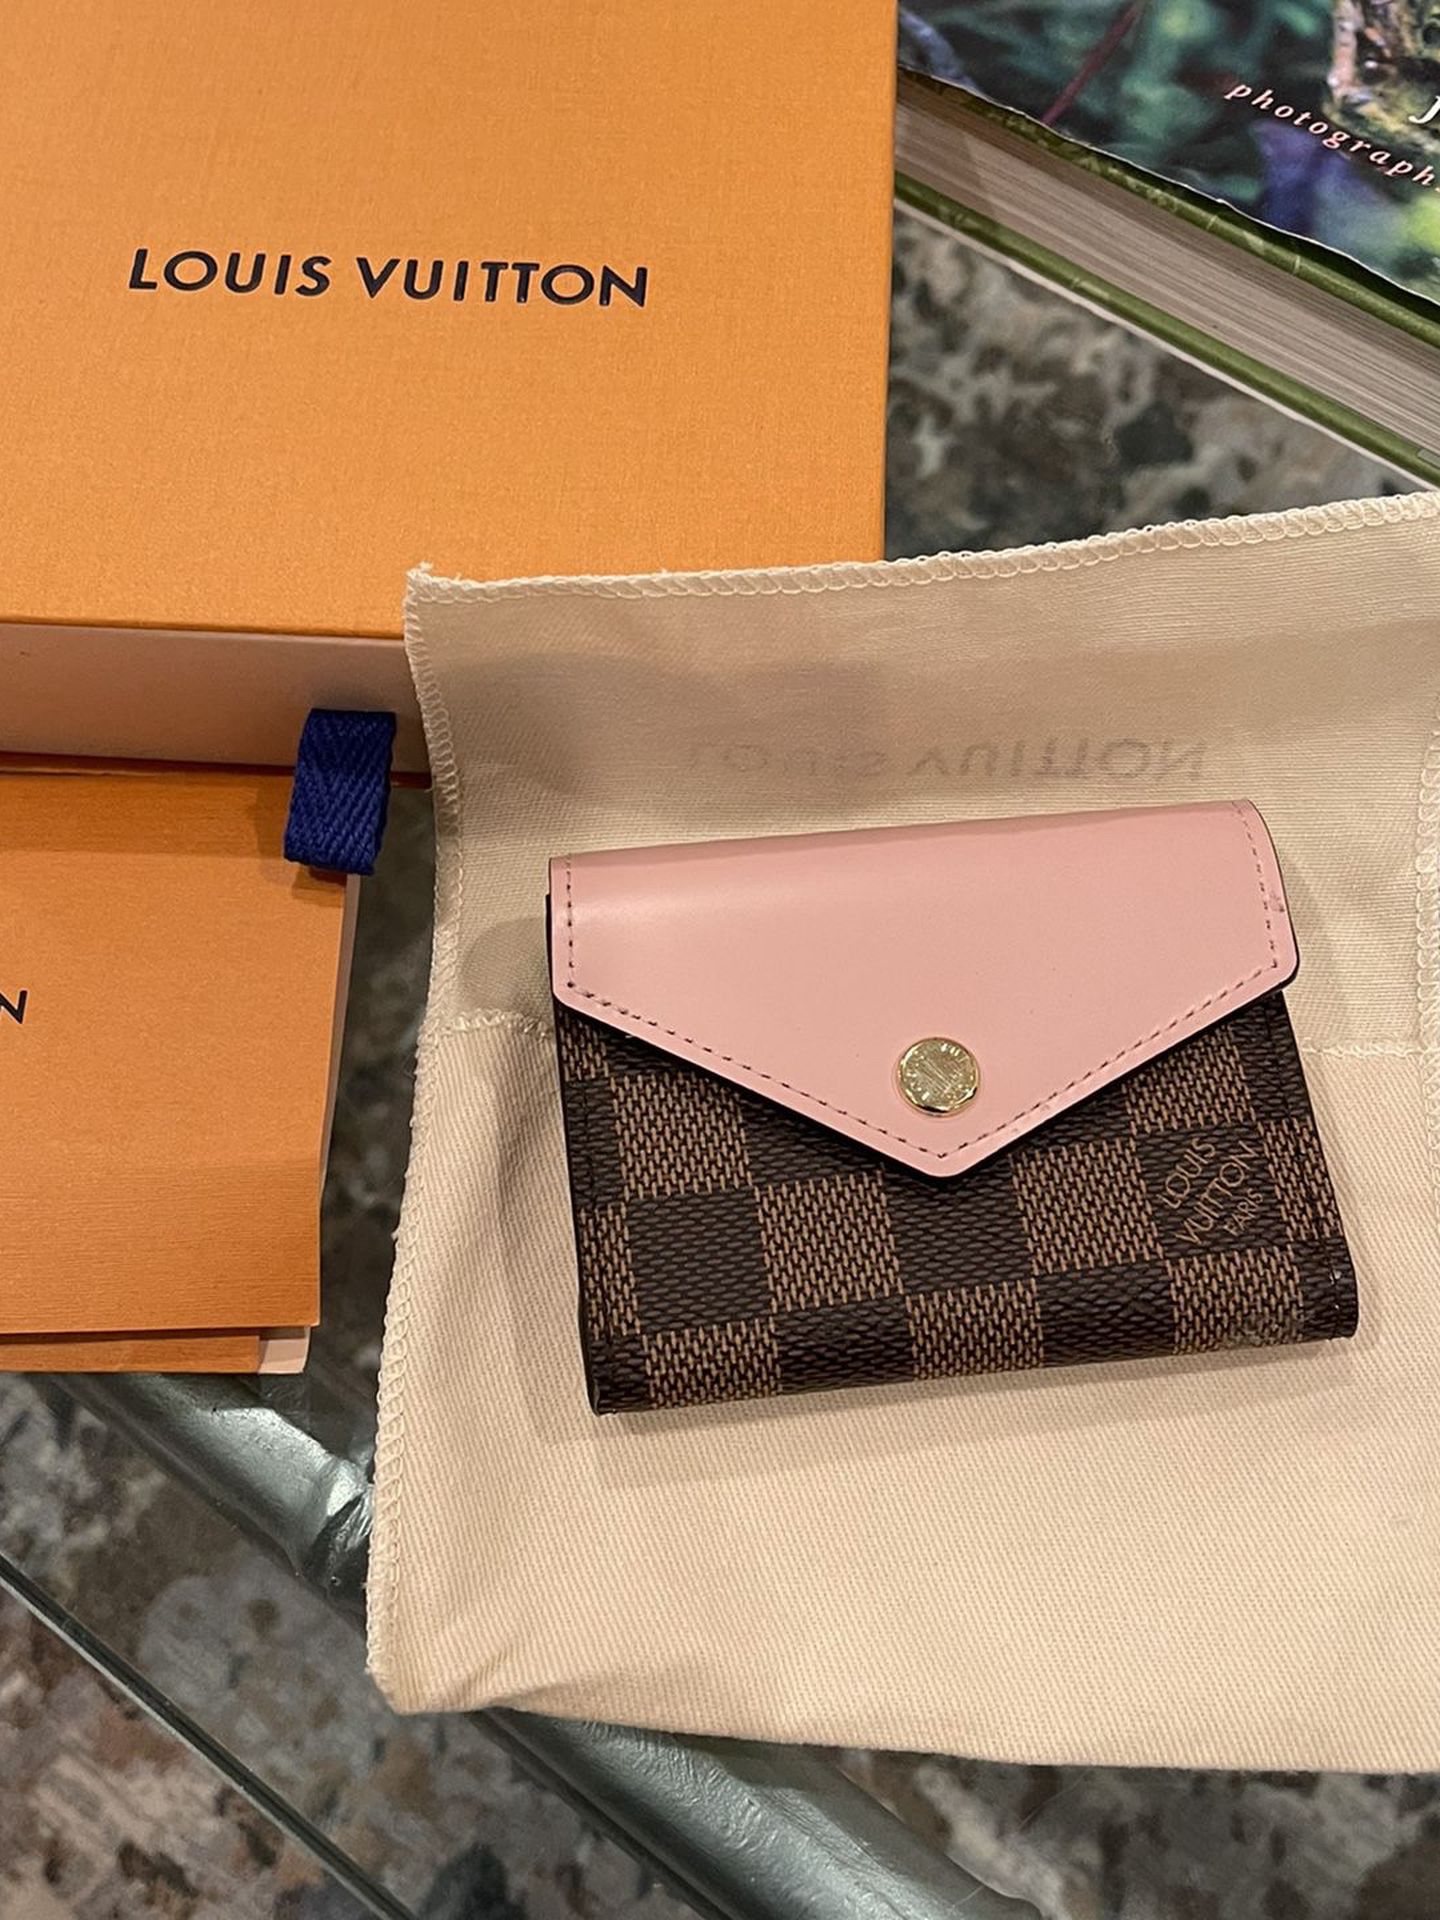 Brand New Louis Vuitton Zoe Wallet In Box With Receipt